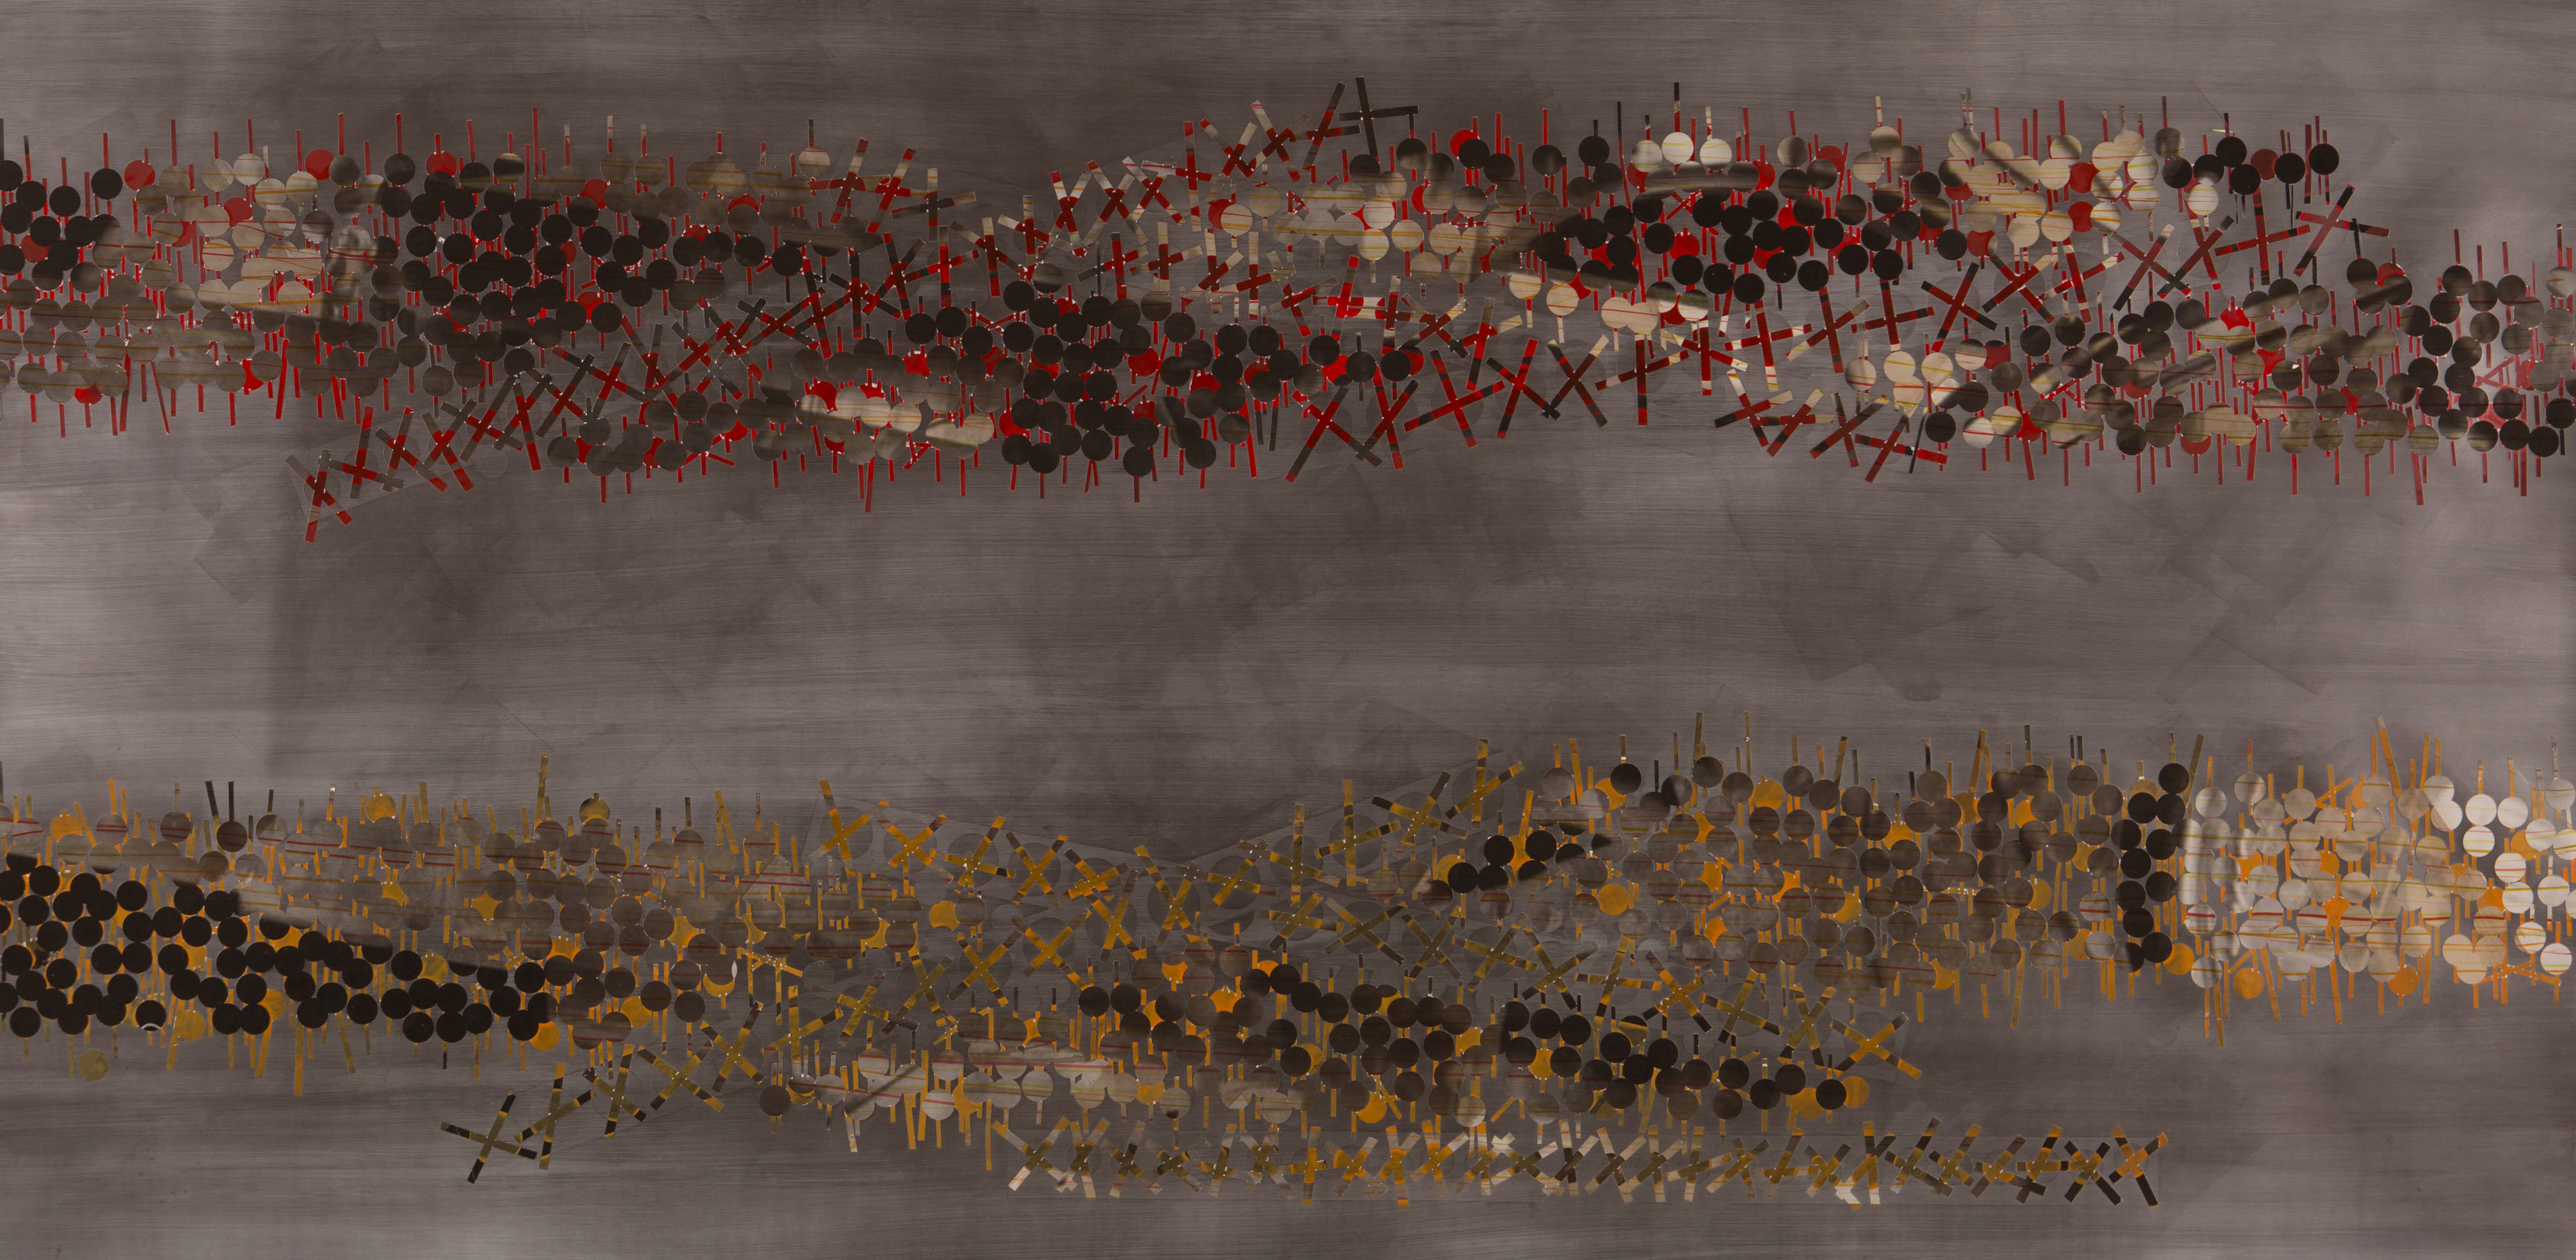 TRIBE 194 - 2013, acrylic, watercolor, graphite on paper, 35.5 x 72 inches (SOLD)